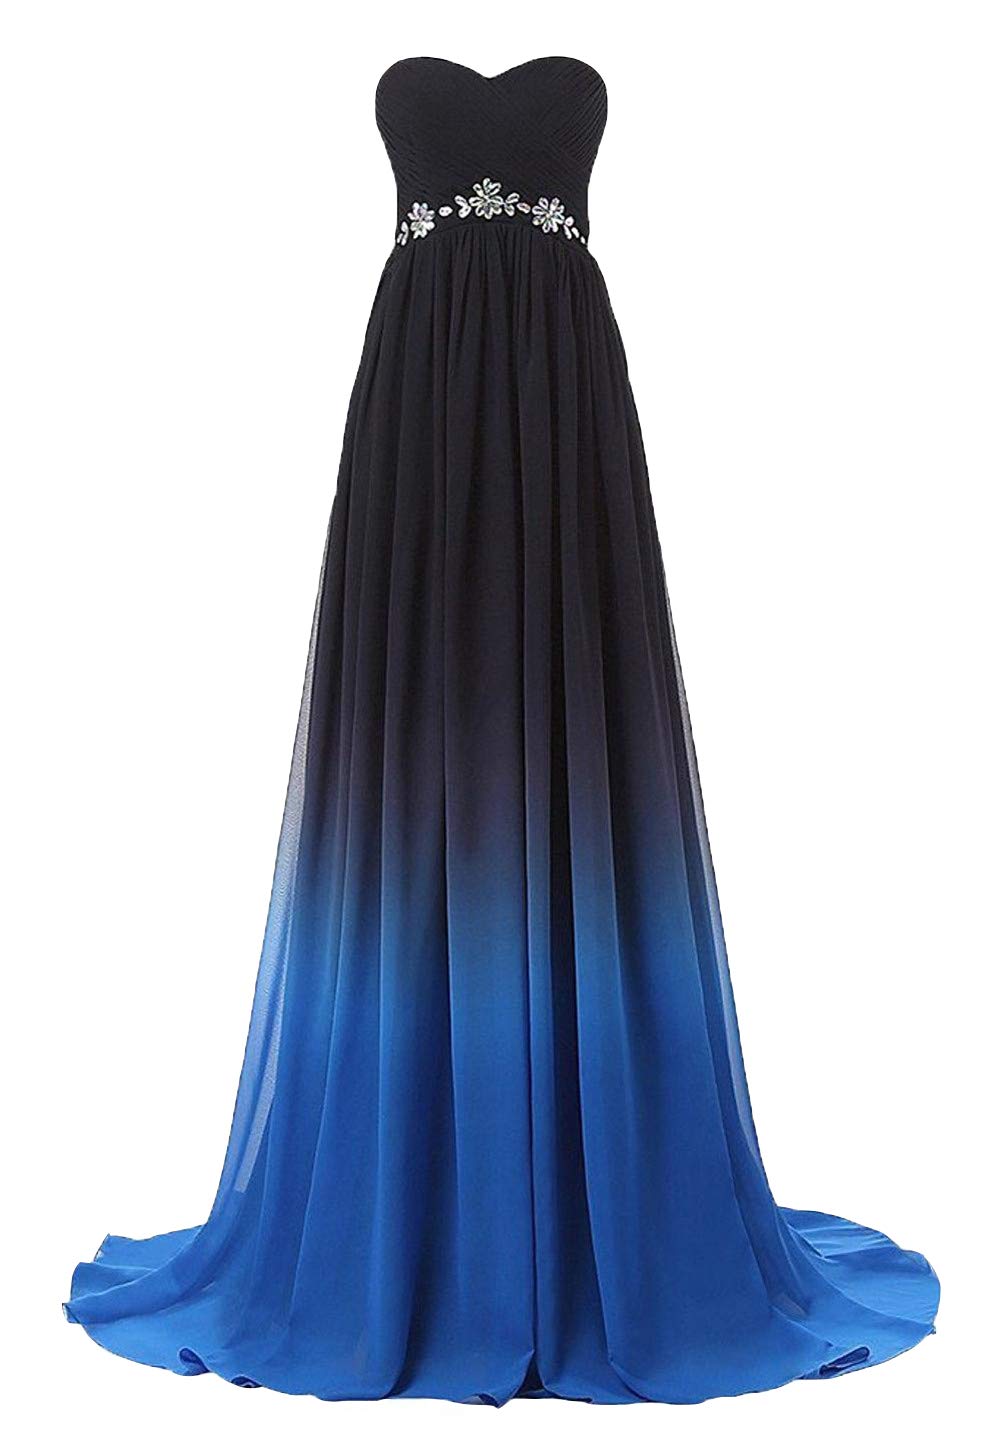 Ai Maria Women's Gradient Prom Dress Formal Evening Gowns Chiffon Long Prom Party Dresses